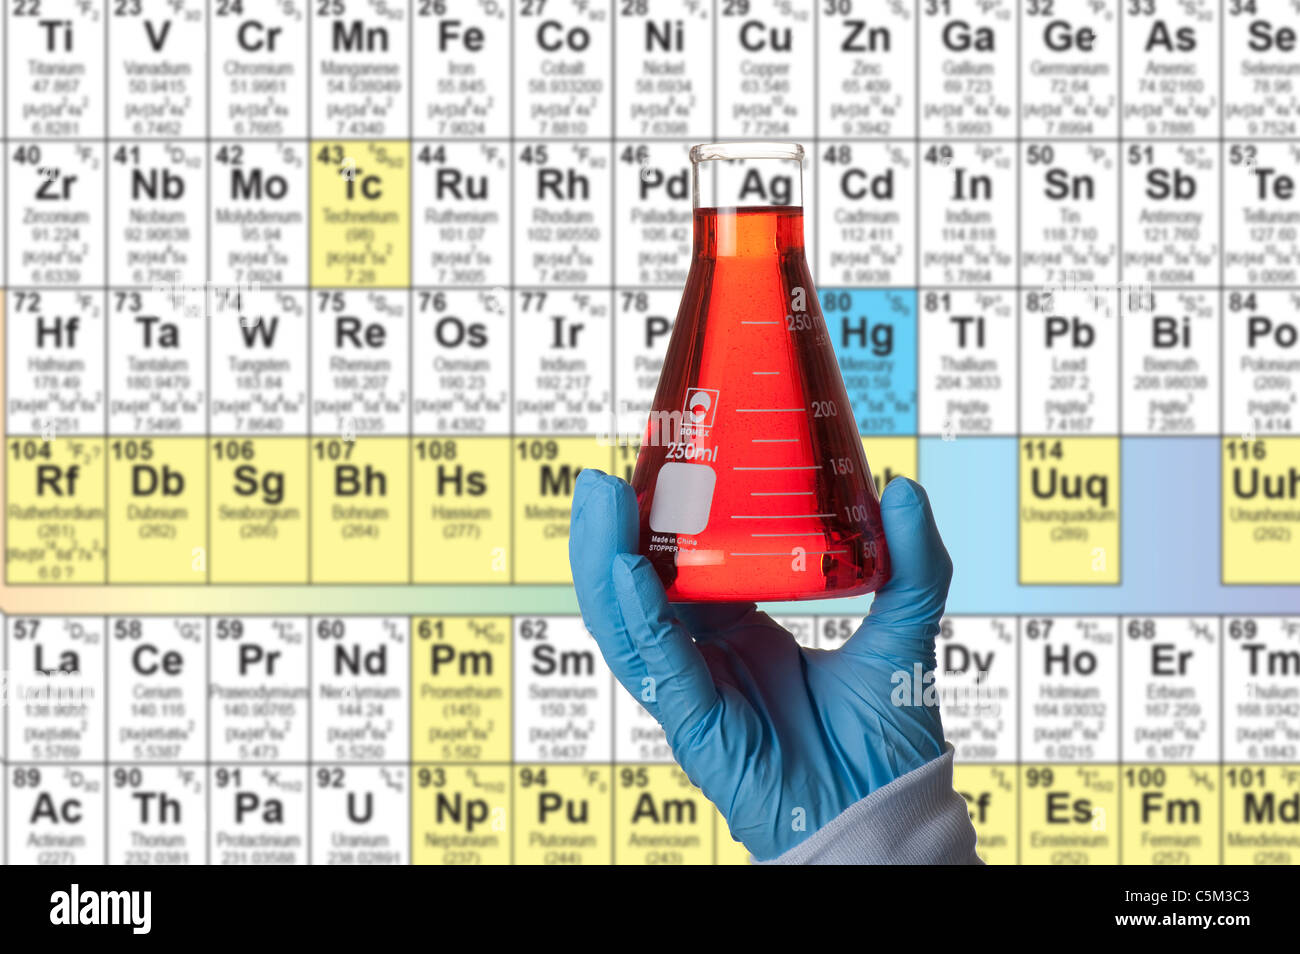 gloved hand holding Erlenmeyer flask Period Table of Elements Stock Photo